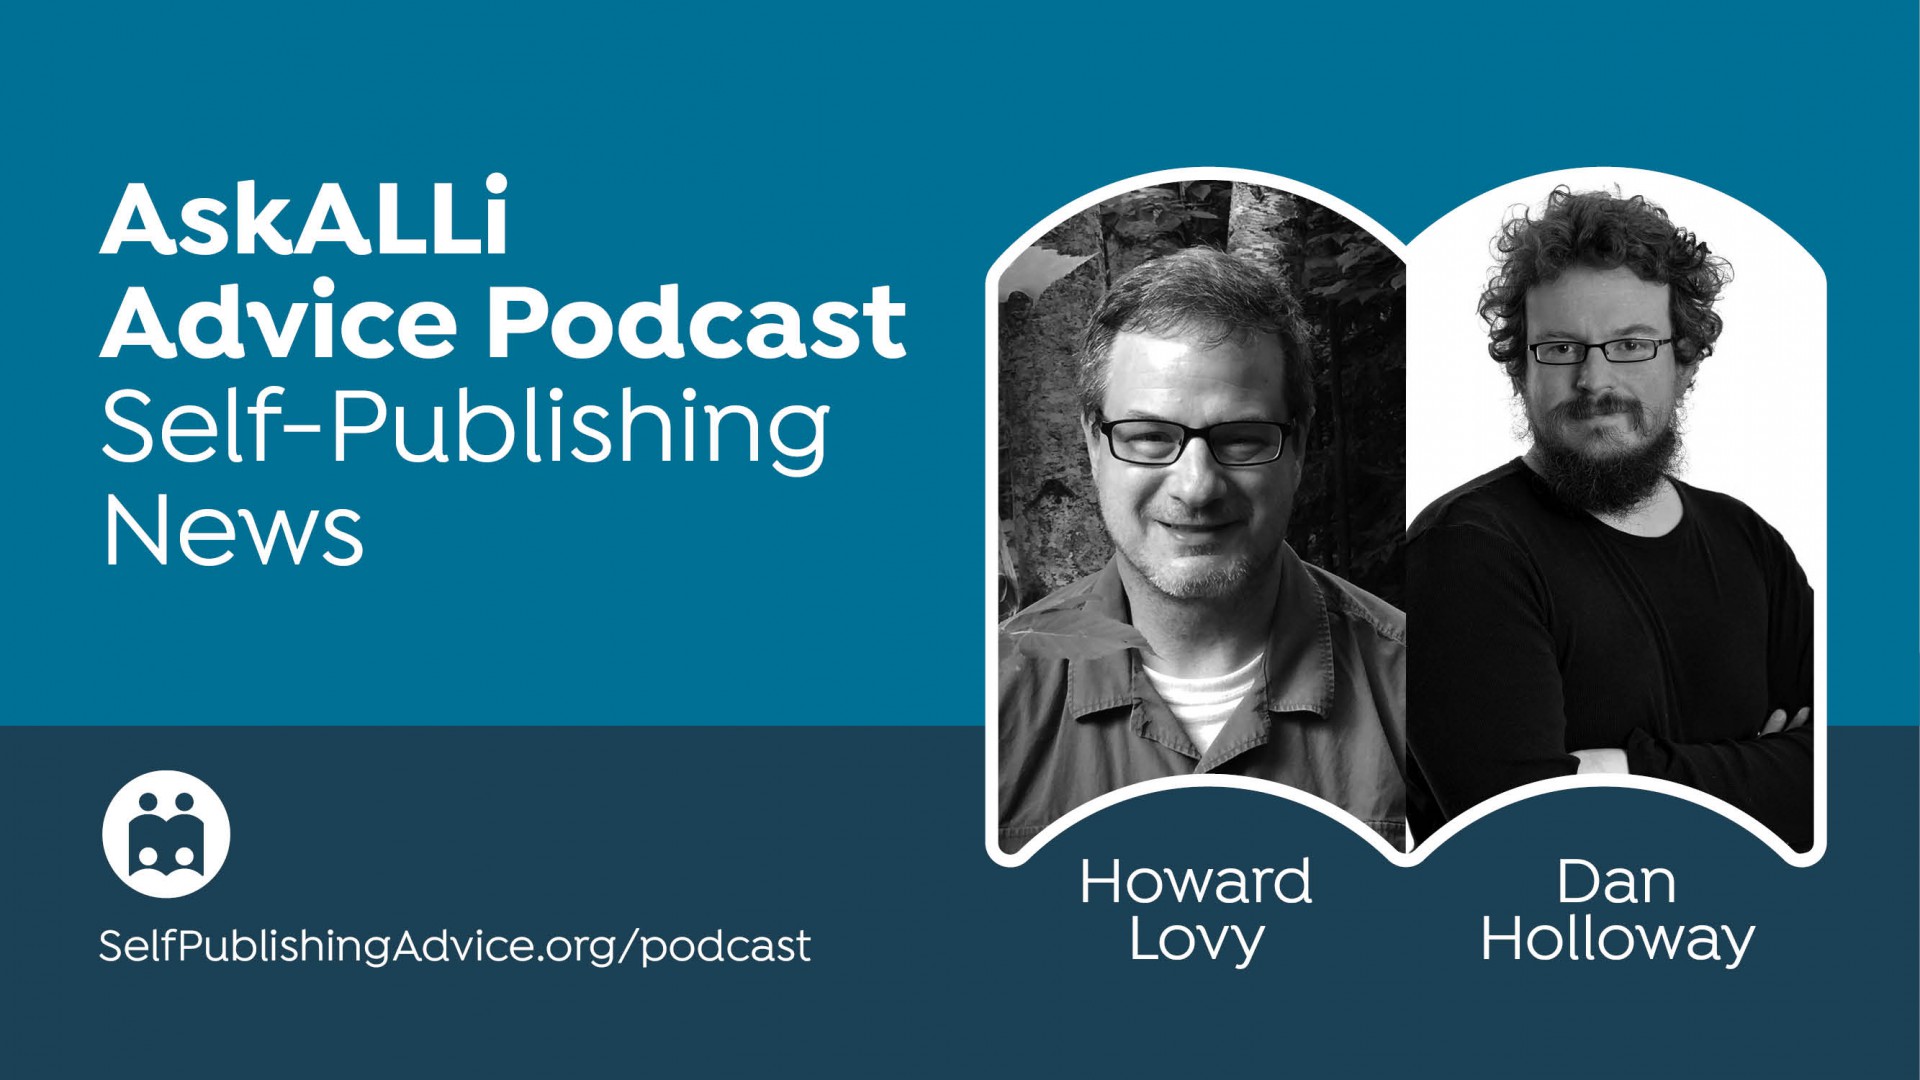 Getting Indies In Local Bookstores, ALL About AI, And How Audio Is Transforming Publishing: Self-Publishing News Podcast With Dan Holloway And Howard Lovy